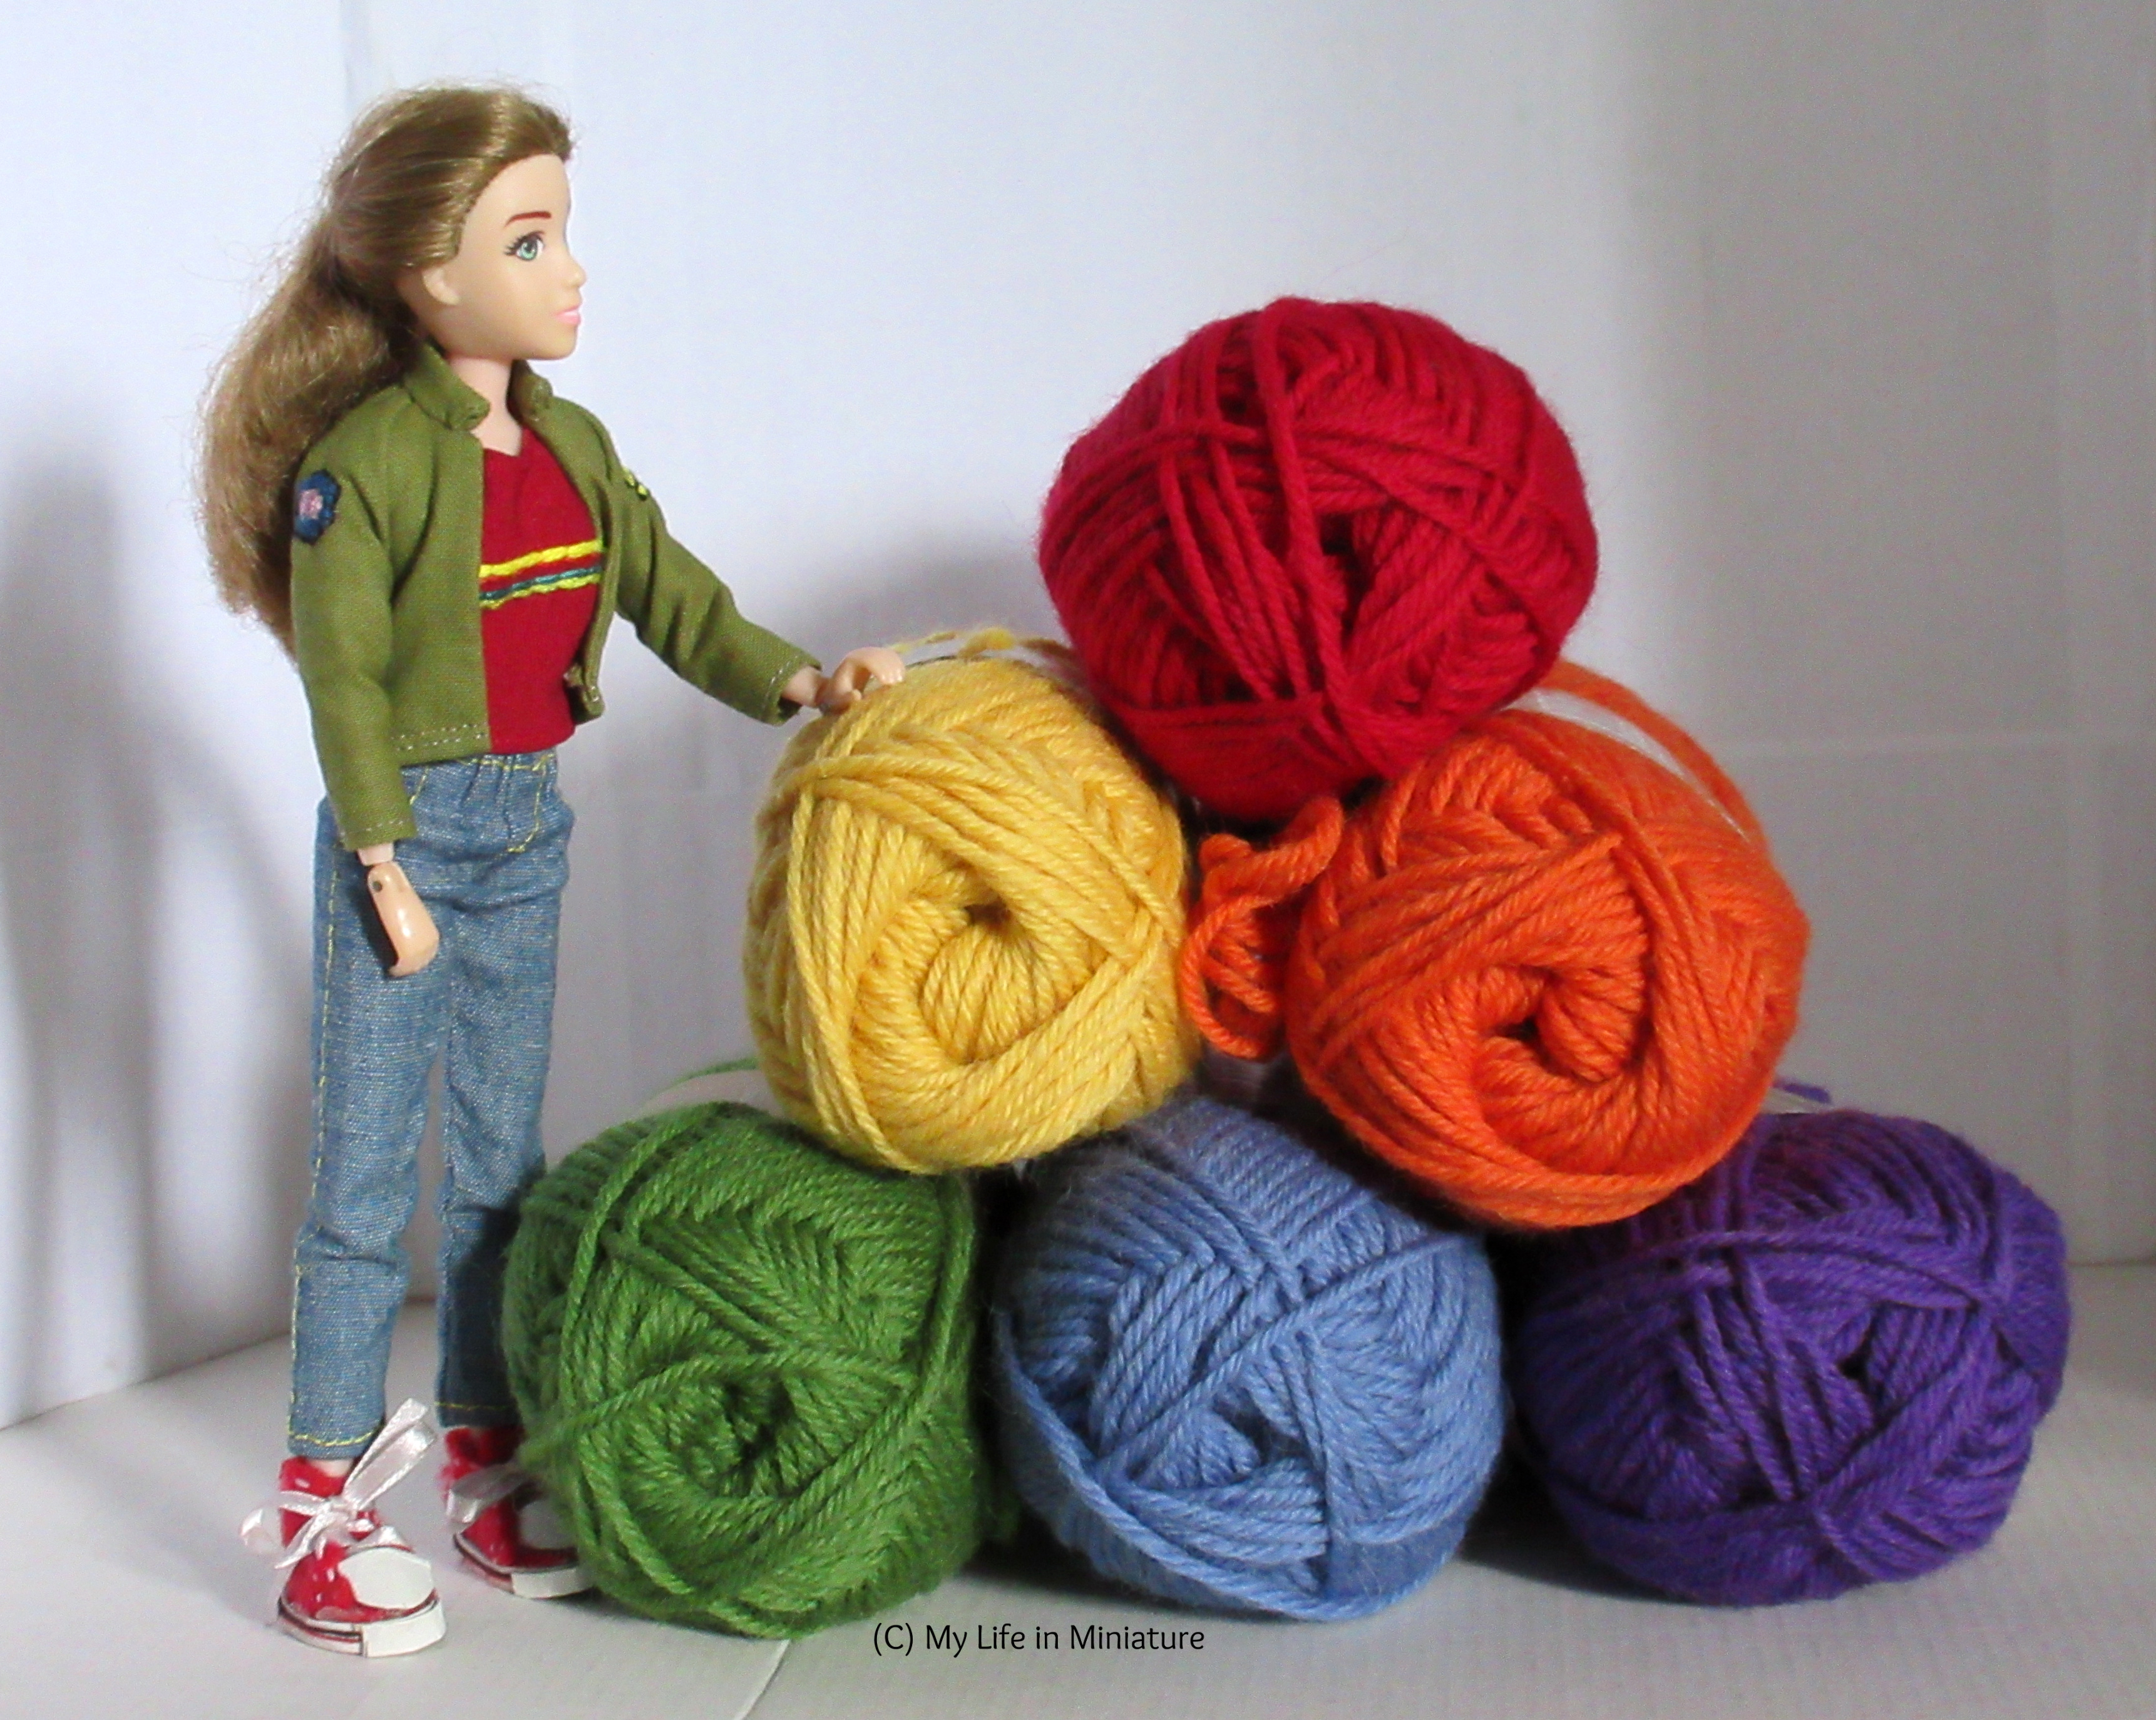 Sarah stands next to a pyramid of stacked balls of yarn. The yarn is in rainbow order from top to bottom. She rests her hand on the closest ball and looks at the top yarn ball.